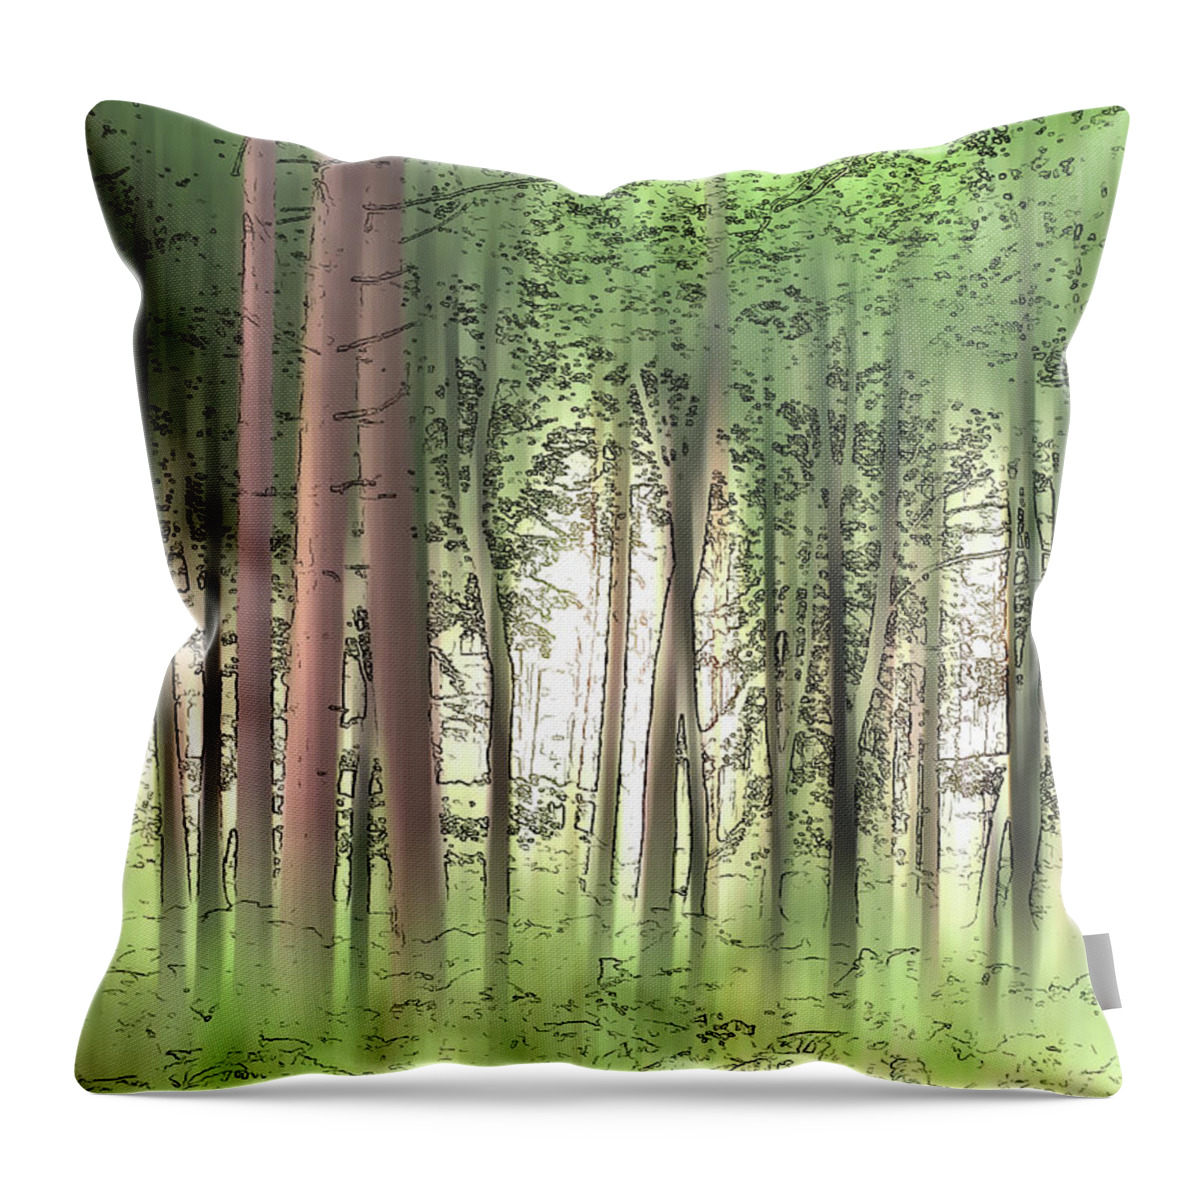 Beautiful Throw Pillow featuring the photograph Woodland Trees In Summer by Ikon Ikon Images